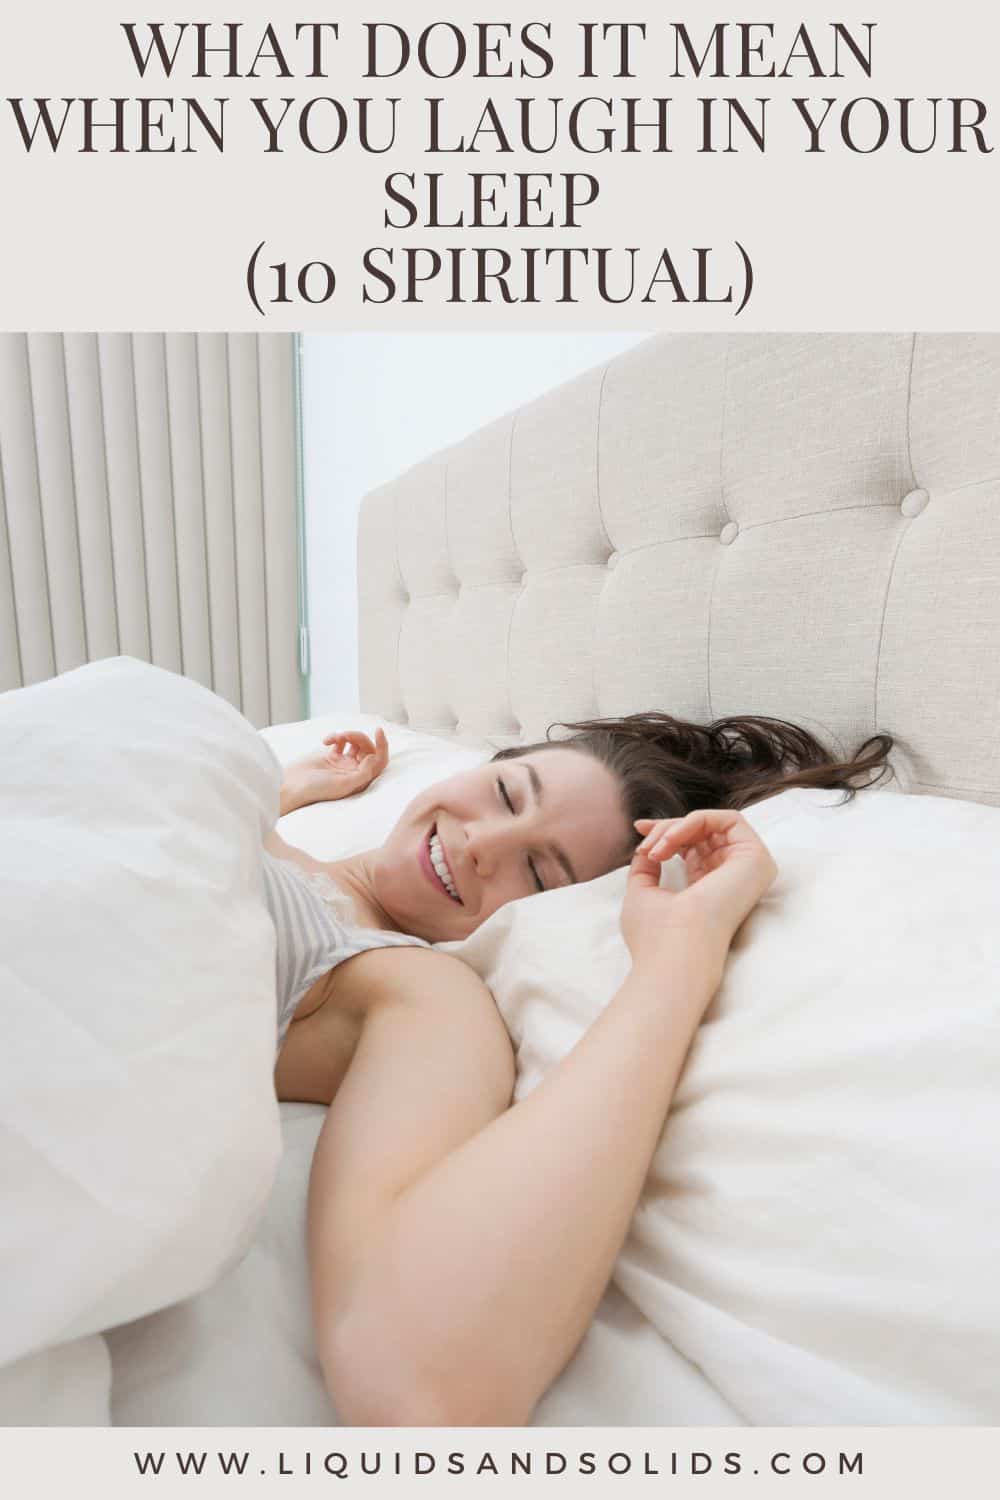 What Does It Mean When You Laugh In Your Sleep (10 Spiritual)